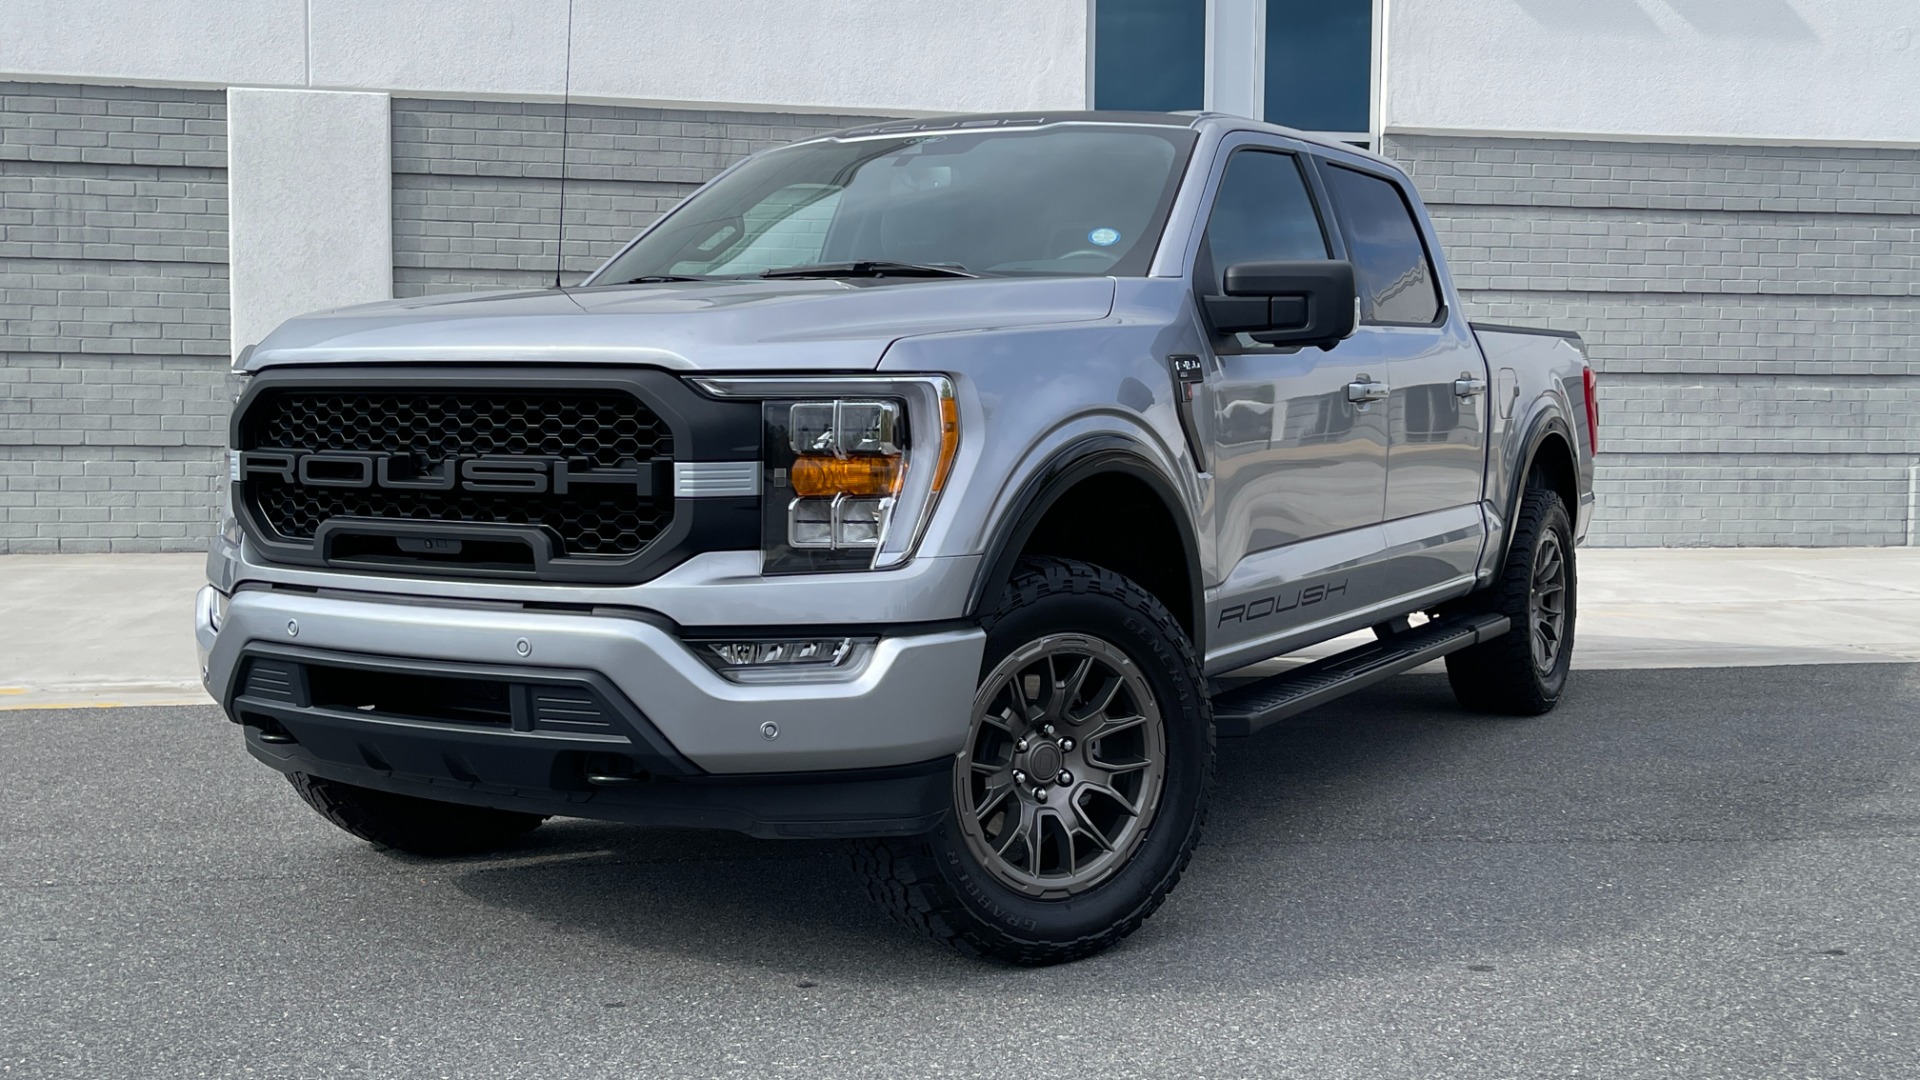 Used 2021 Ford F-150 ROUSH / 5.0 V8 / LEATHER / ACTIVE EXHAUST / FOX SHOCKS / CONSOLE SAFE for sale $69,985 at Formula Imports in Charlotte NC 28227 2